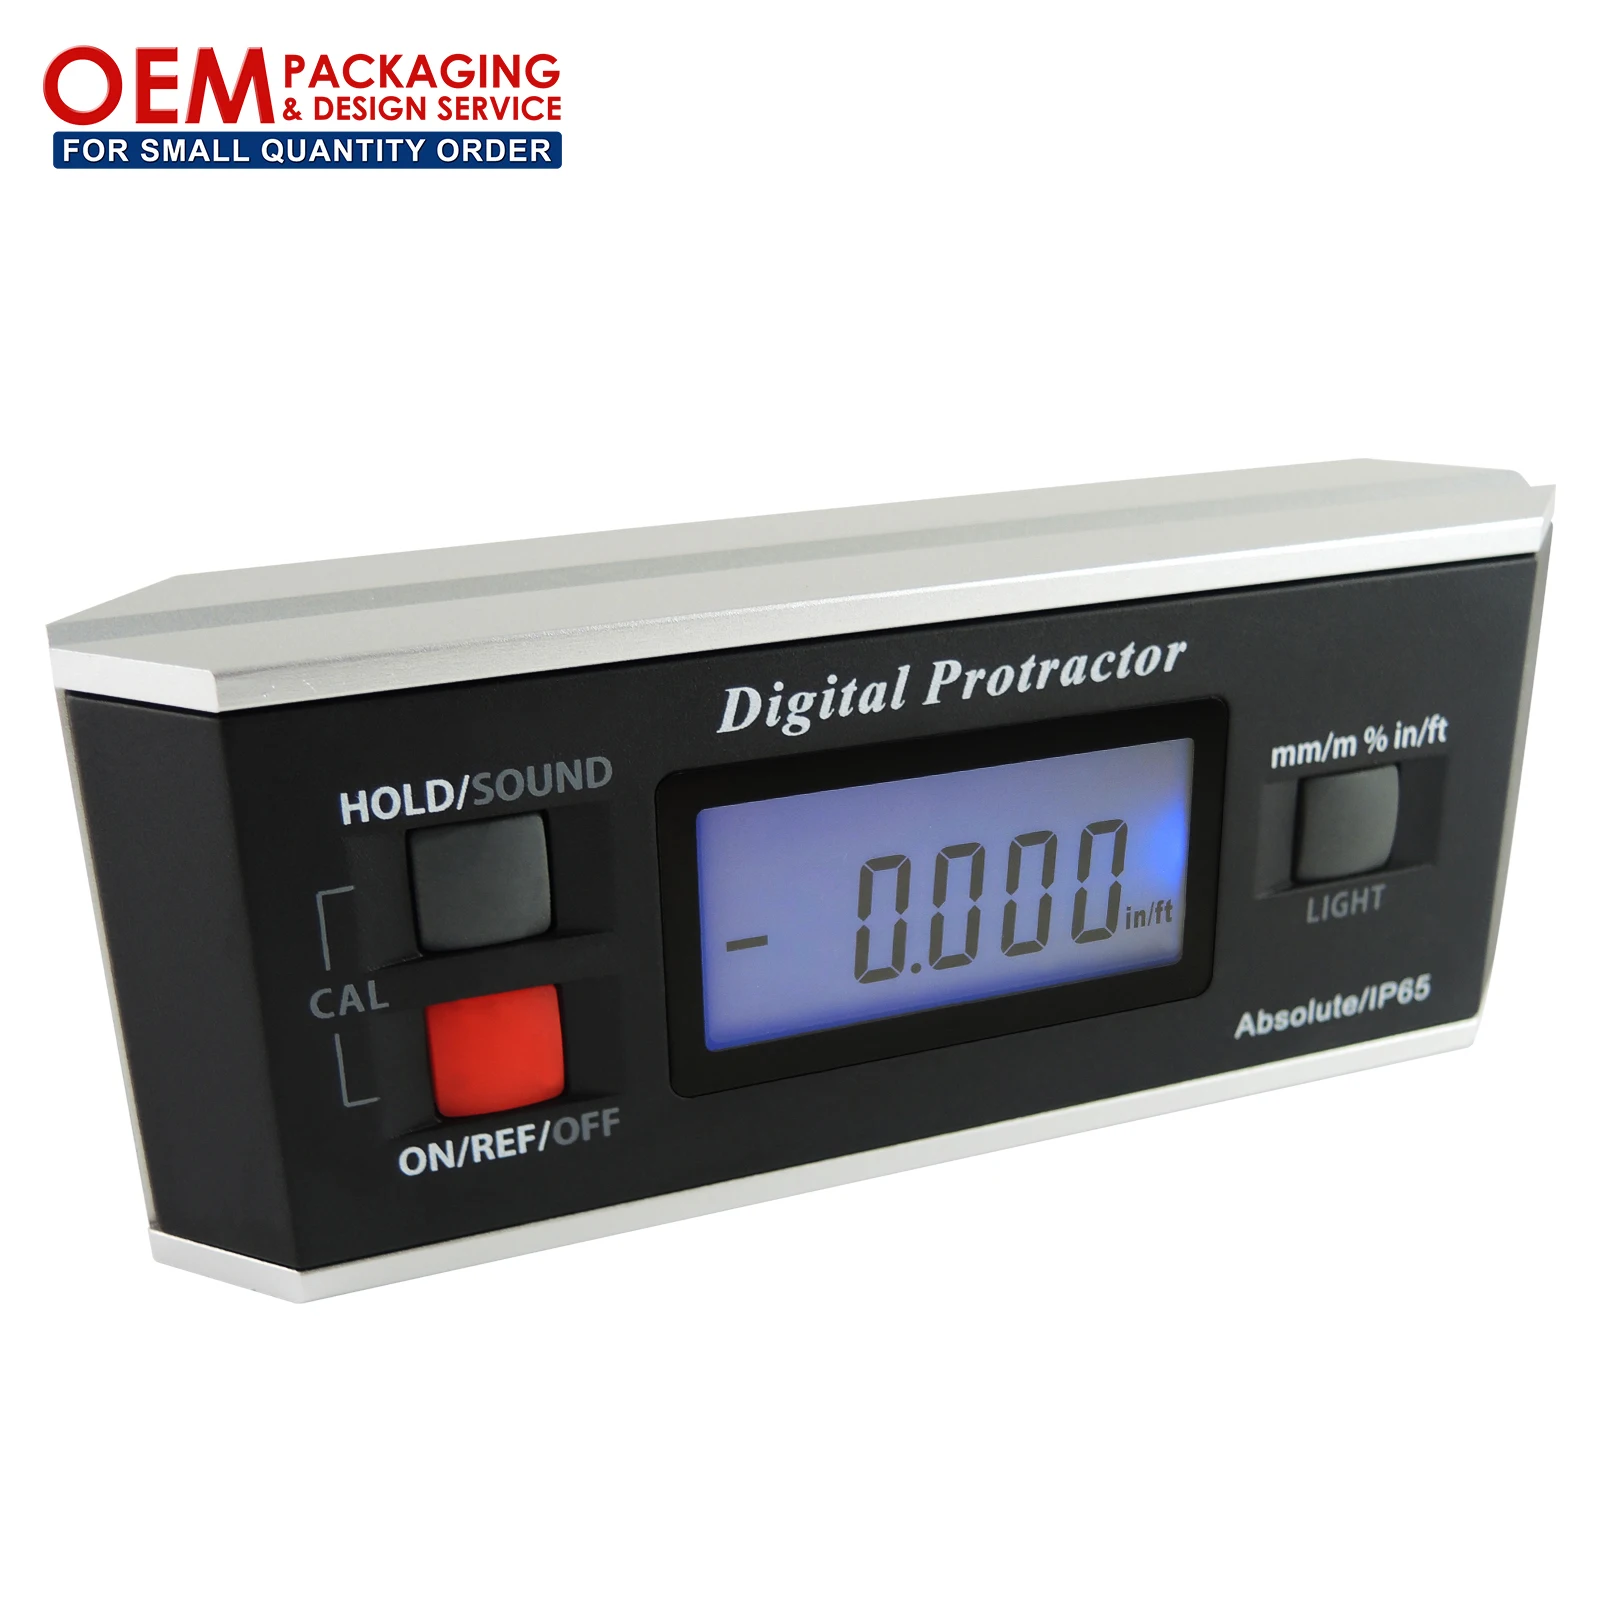 Digital Protractor 360 Degree Inclinometer Leveling Instrument 490 Degree Magnetic Base for Angle And Level Measurement